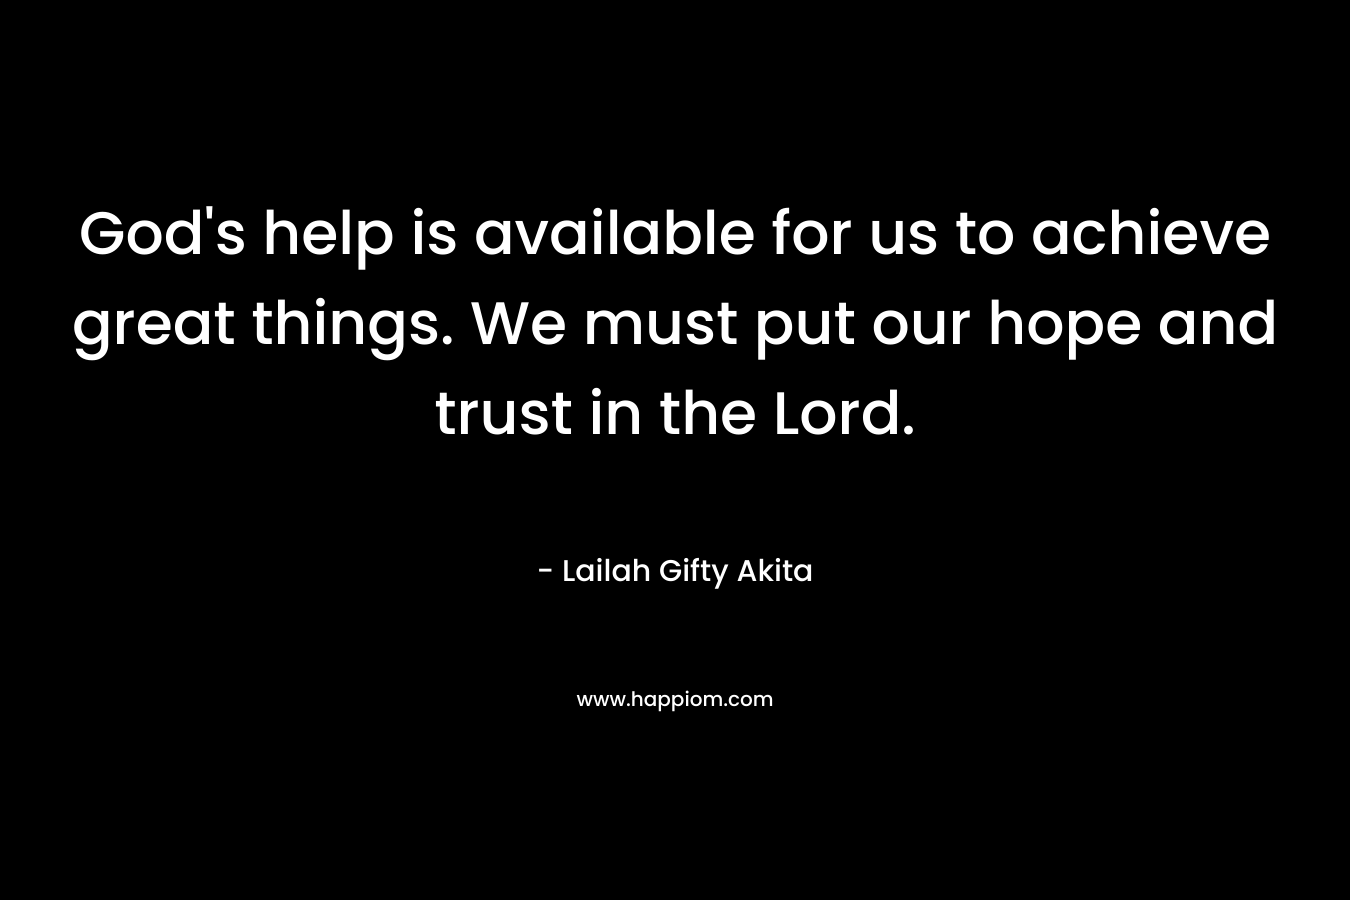 God's help is available for us to achieve great things. We must put our hope and trust in the Lord.